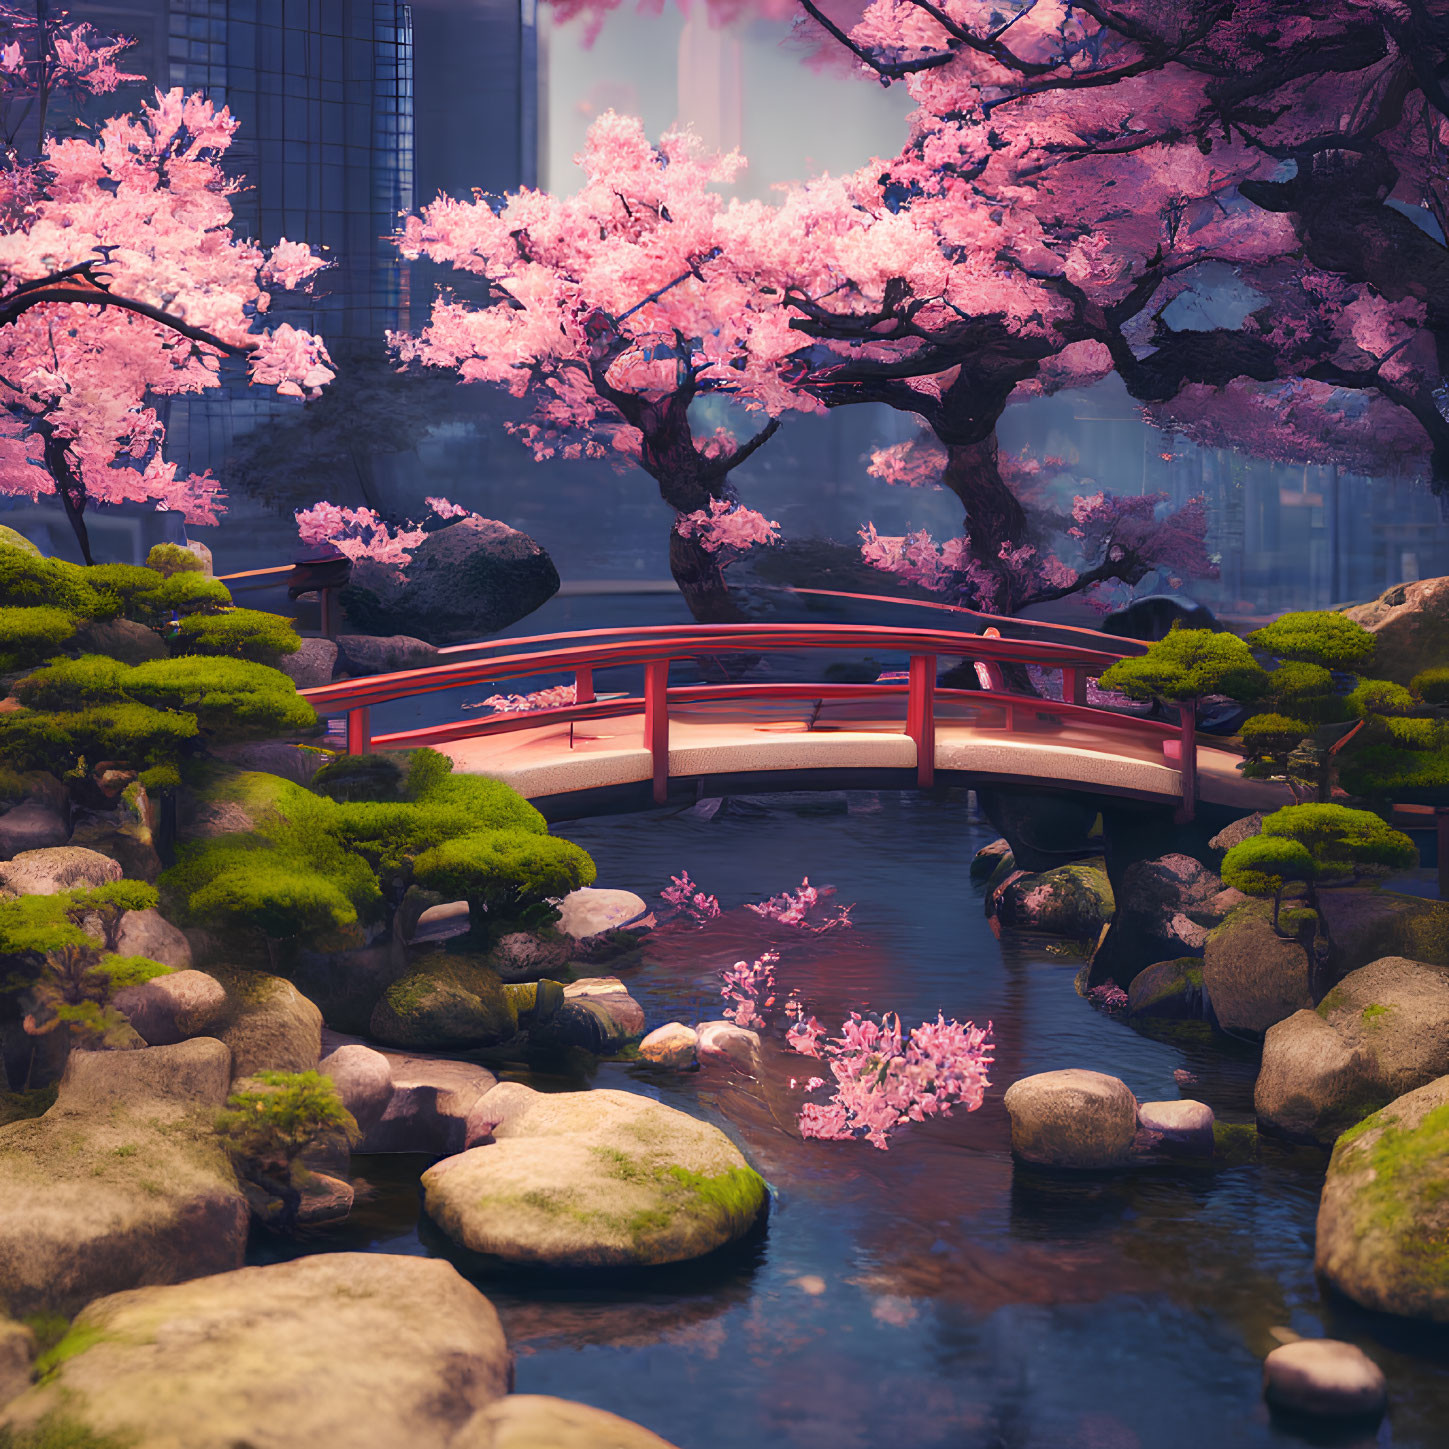 Tranquil Japanese garden with red arched bridge, cherry blossoms, rocks, and pine trees